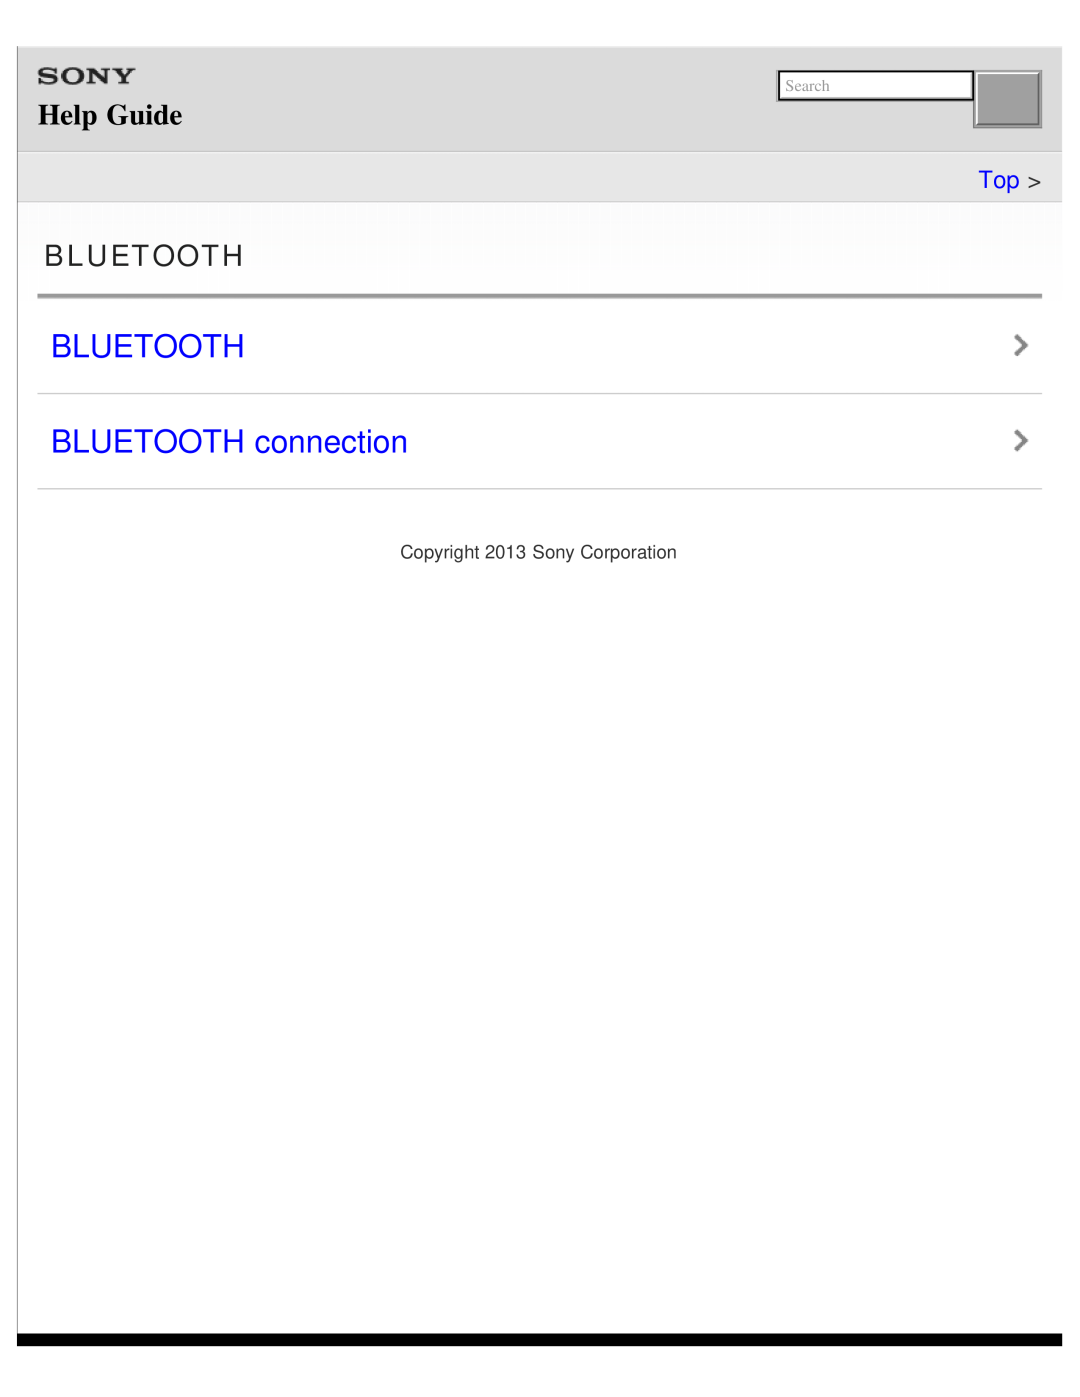 Sony DR-BTN200 manual BLUETOOTH BLUETOOTH connection, Bluetooth, Help Guide, Top, Copyright 2013 Sony Corporation, Search 